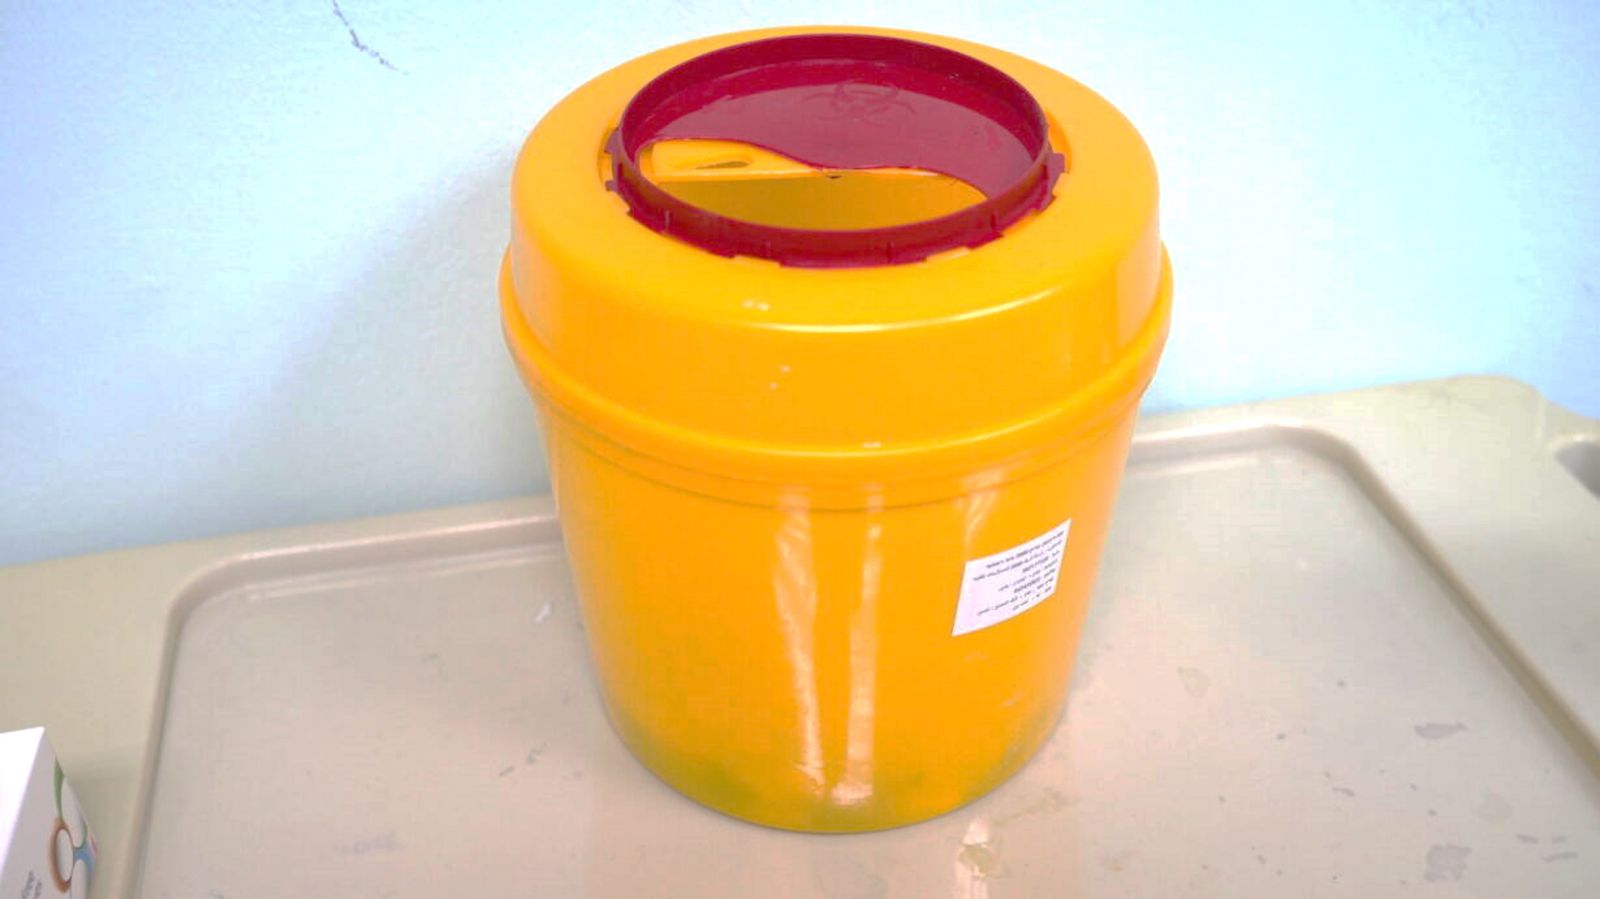 A yellow container with a red lid